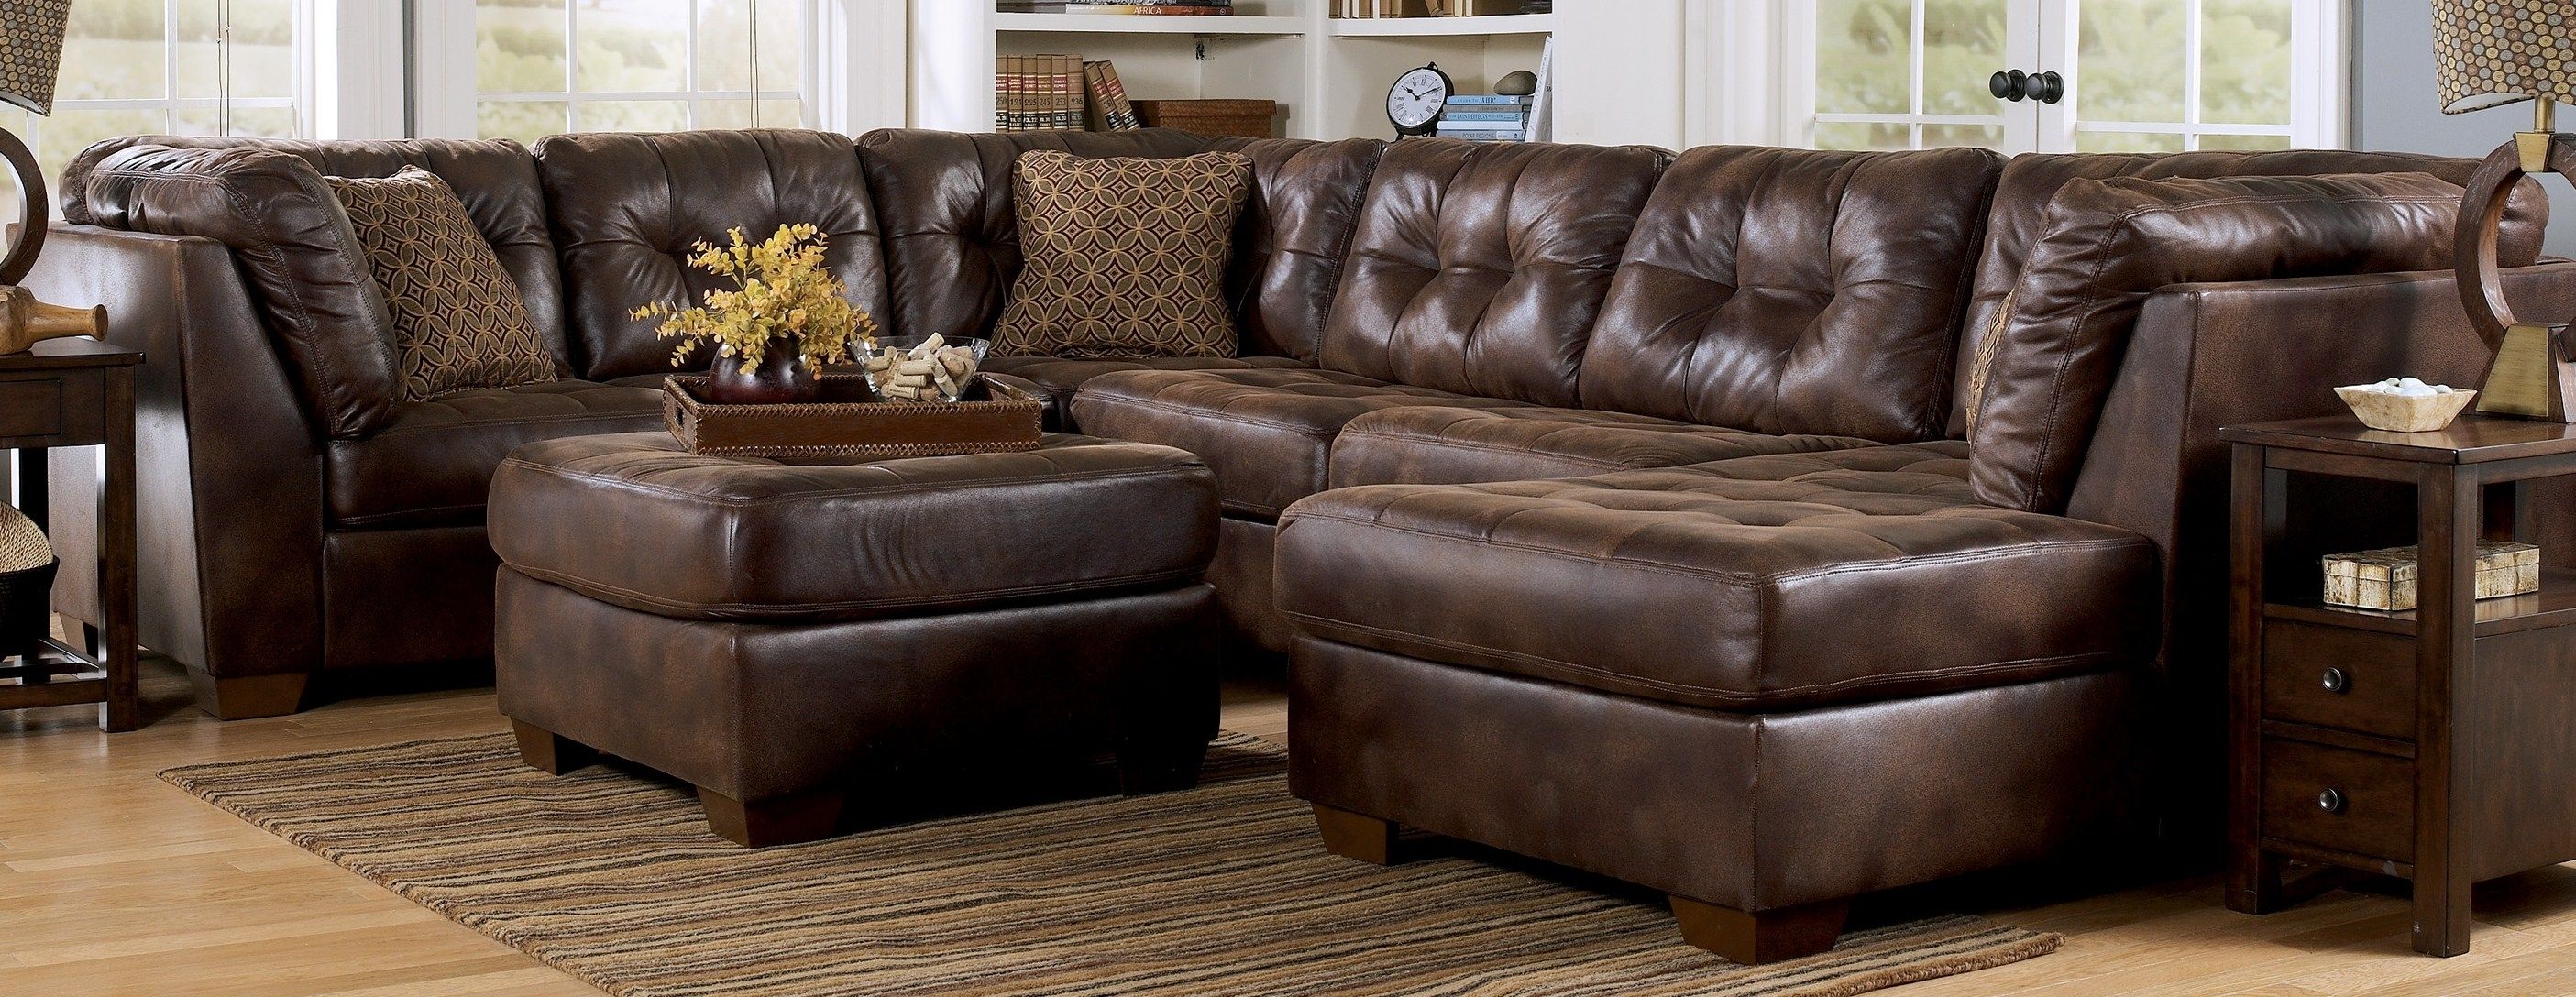 Frontier – Canyon The New Sectional Couch Im Saving For. | My Inside Leather Sectionals With Chaise And Ottoman (Photo 12 of 15)